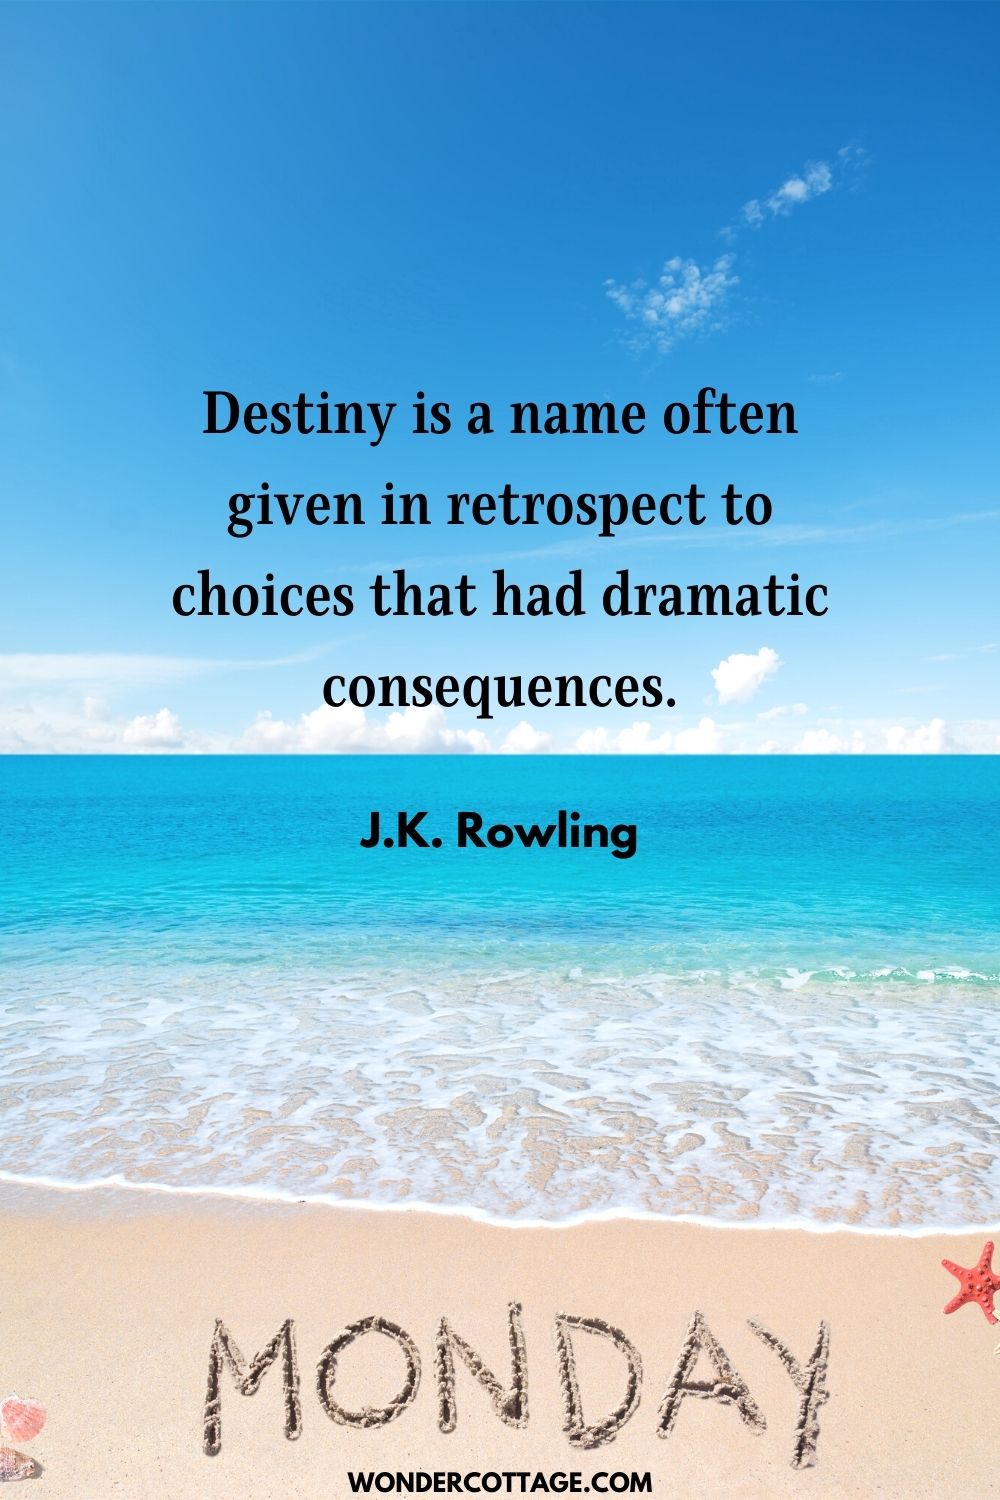 Destiny is a name often given in retrospect to choices that had dramatic consequences." J.K. Rowling,